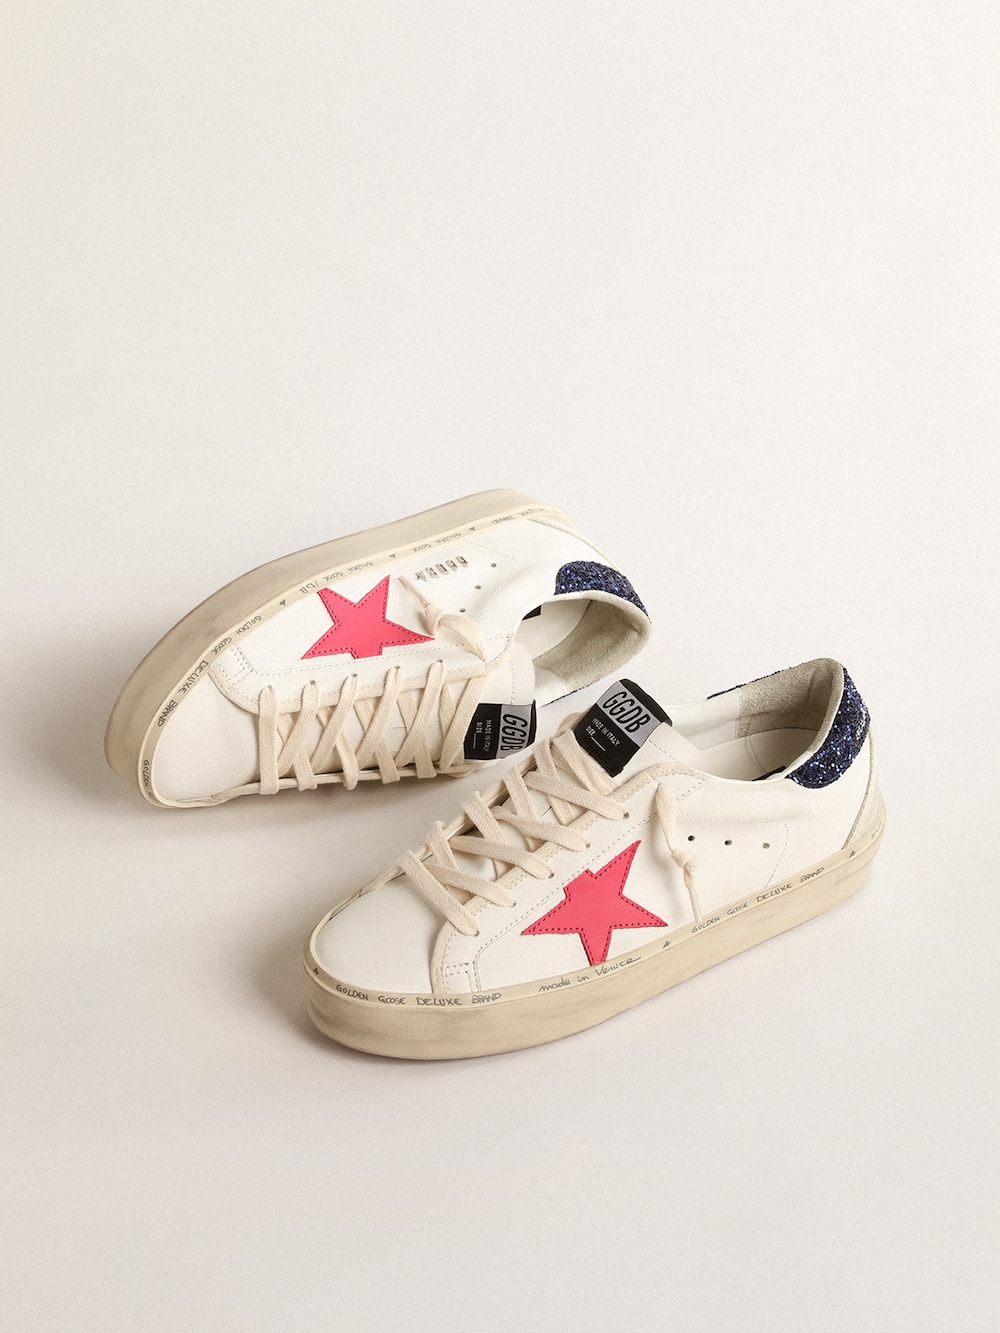 Golden Goose - Hi Star with fuchsia leather star and blue glitter heel tab in 